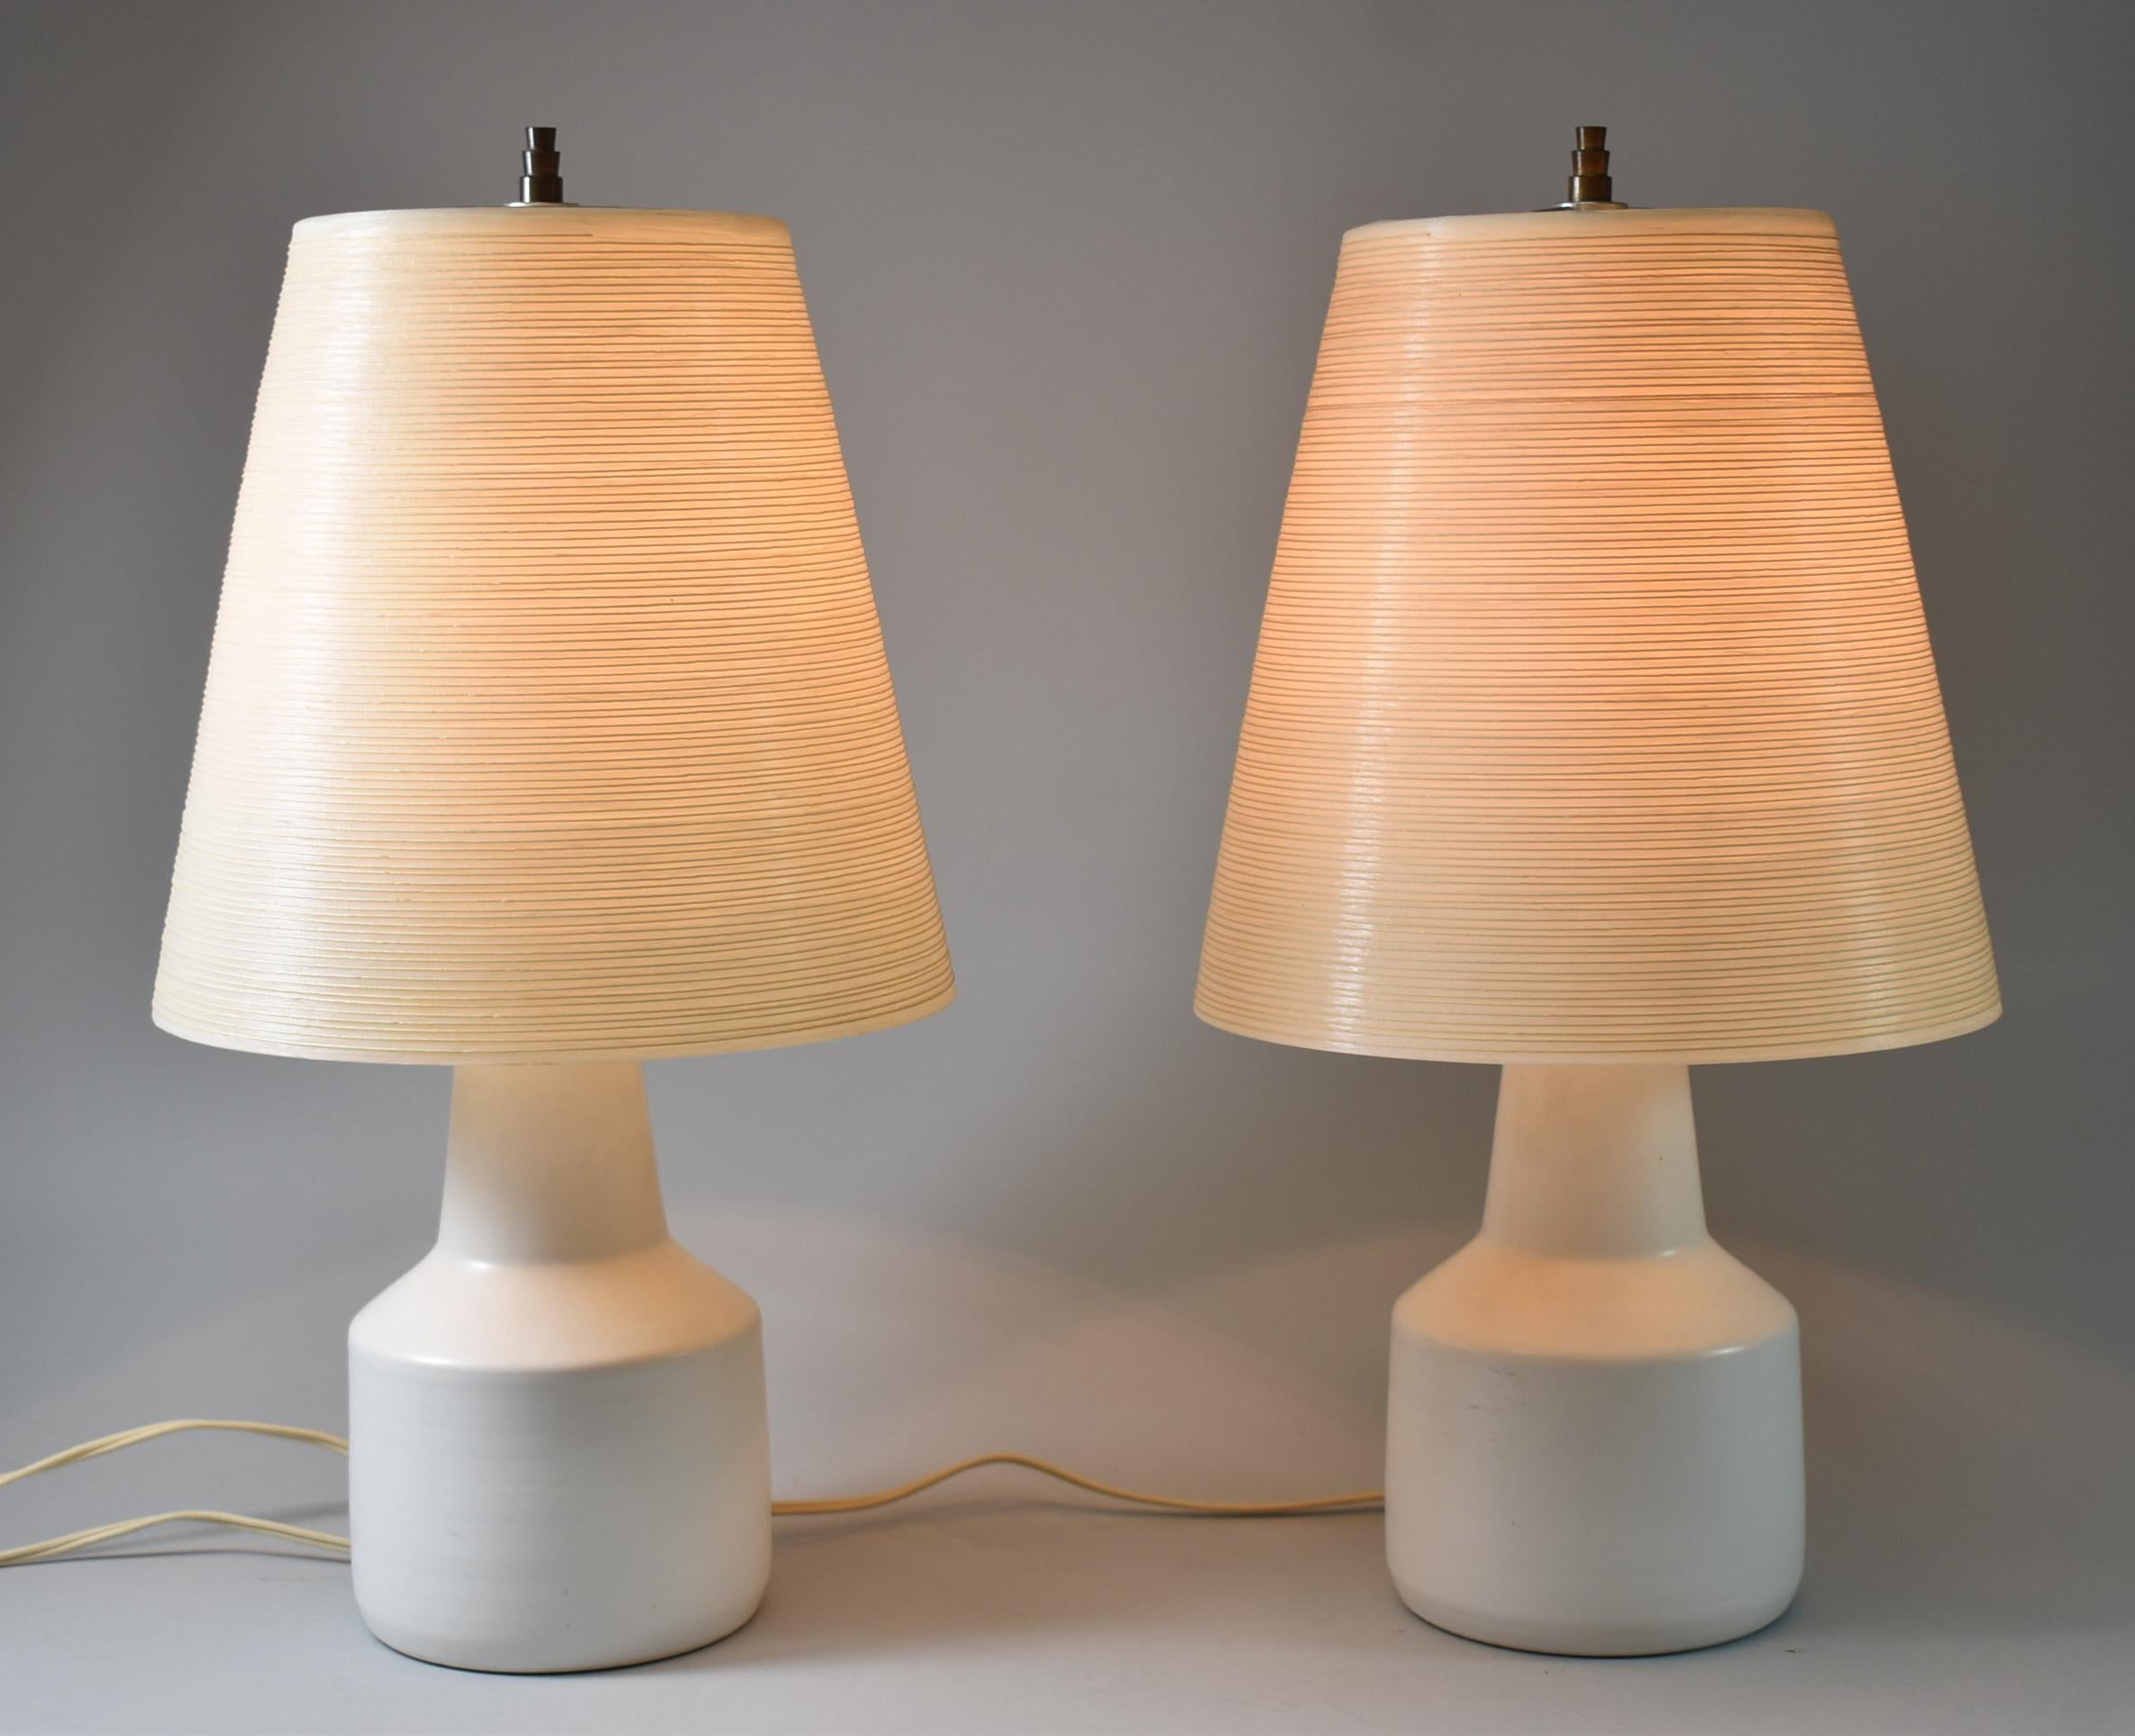 Pair vintage eggshell white pottery lamps by Lotte & Gunnar Bostlund Canada circa 1960's. Original fiberglass and string lamp shades with a skyscraper finial. 18